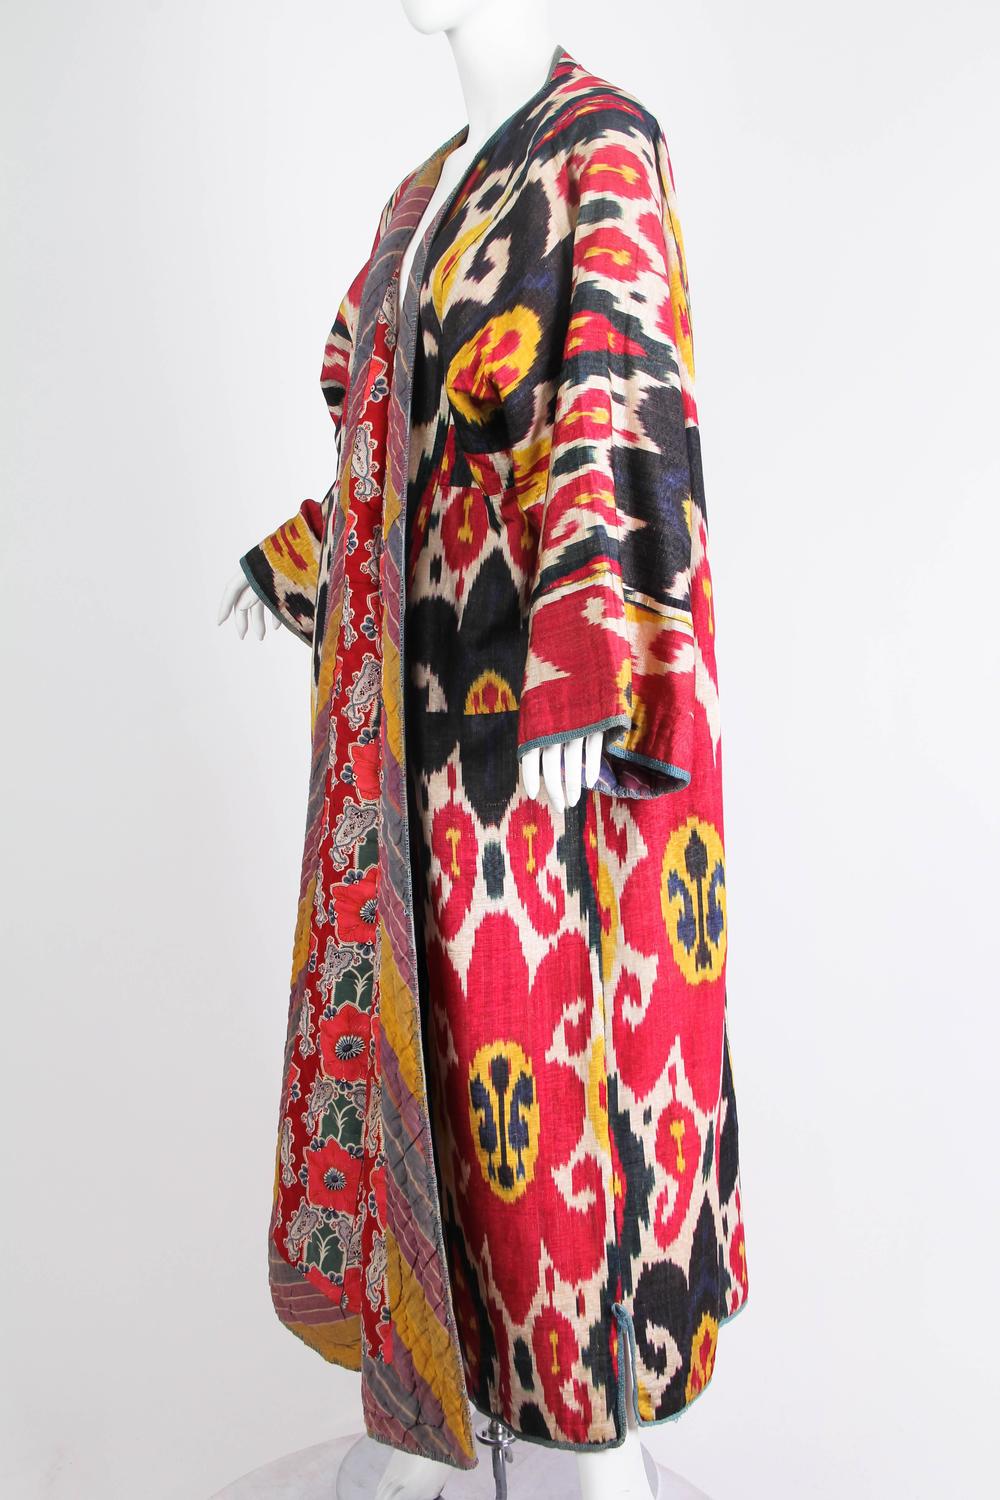 Fantastic Antique Handwoven Silk Ikat Chapan Robe For Sale at 1stdibs